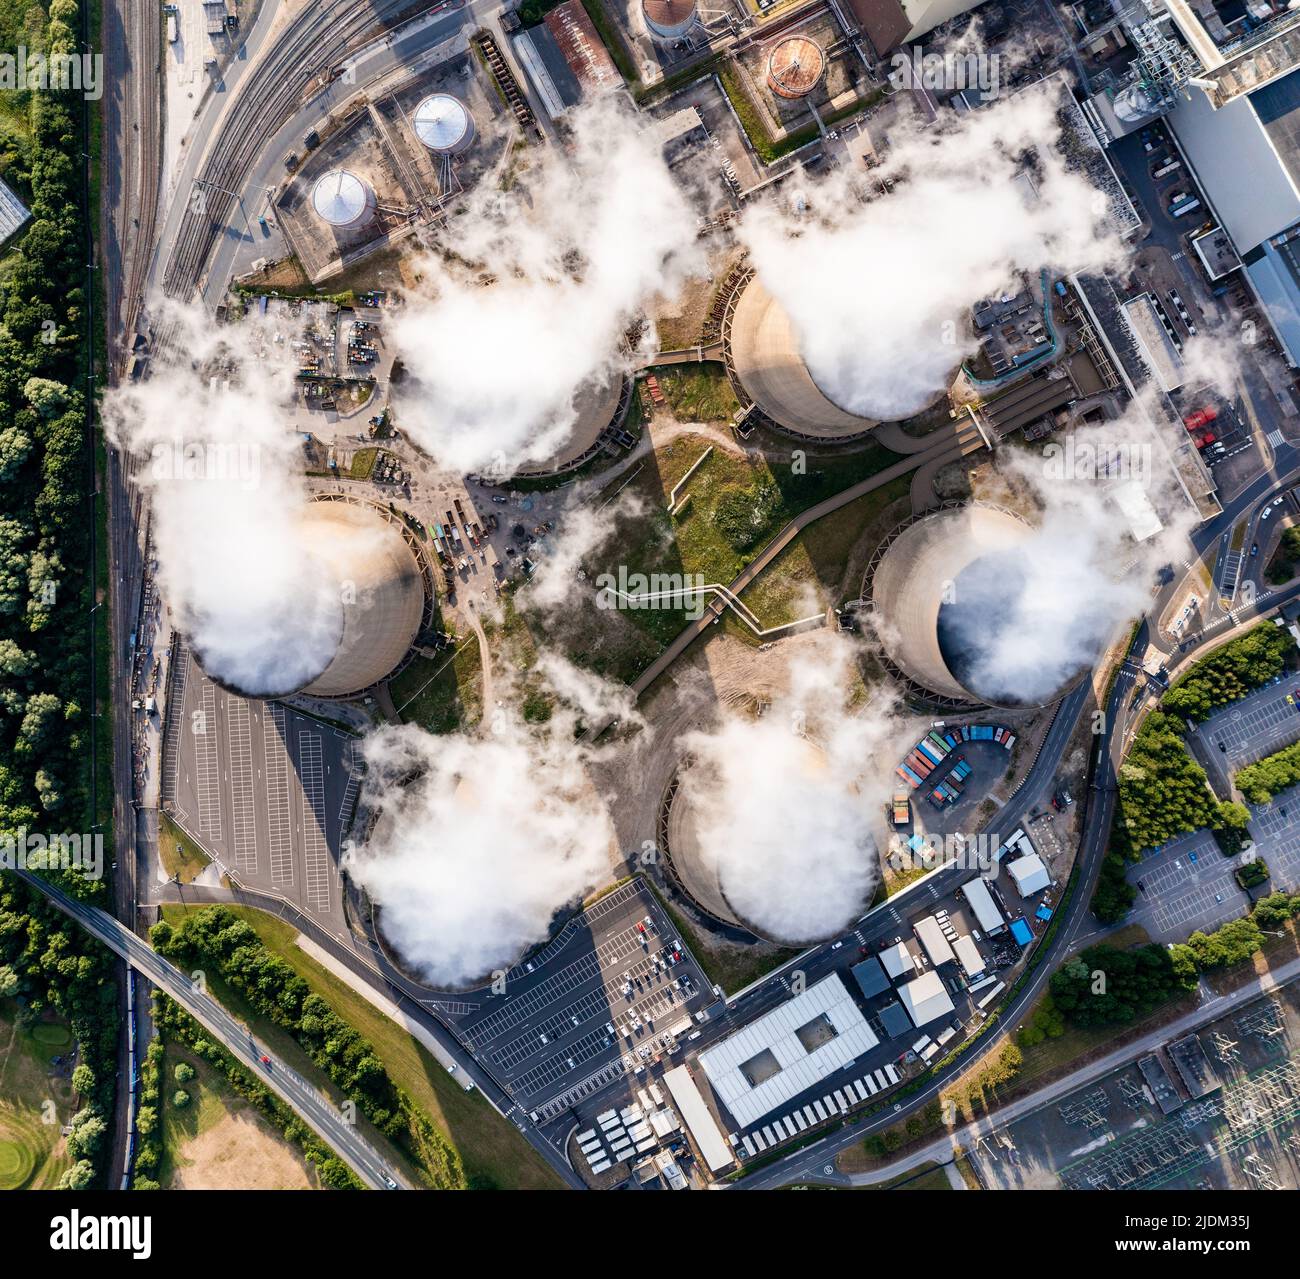 Aerial top down view of a group of cooling towers emitting steam at a large coal fired power station Stock Photo